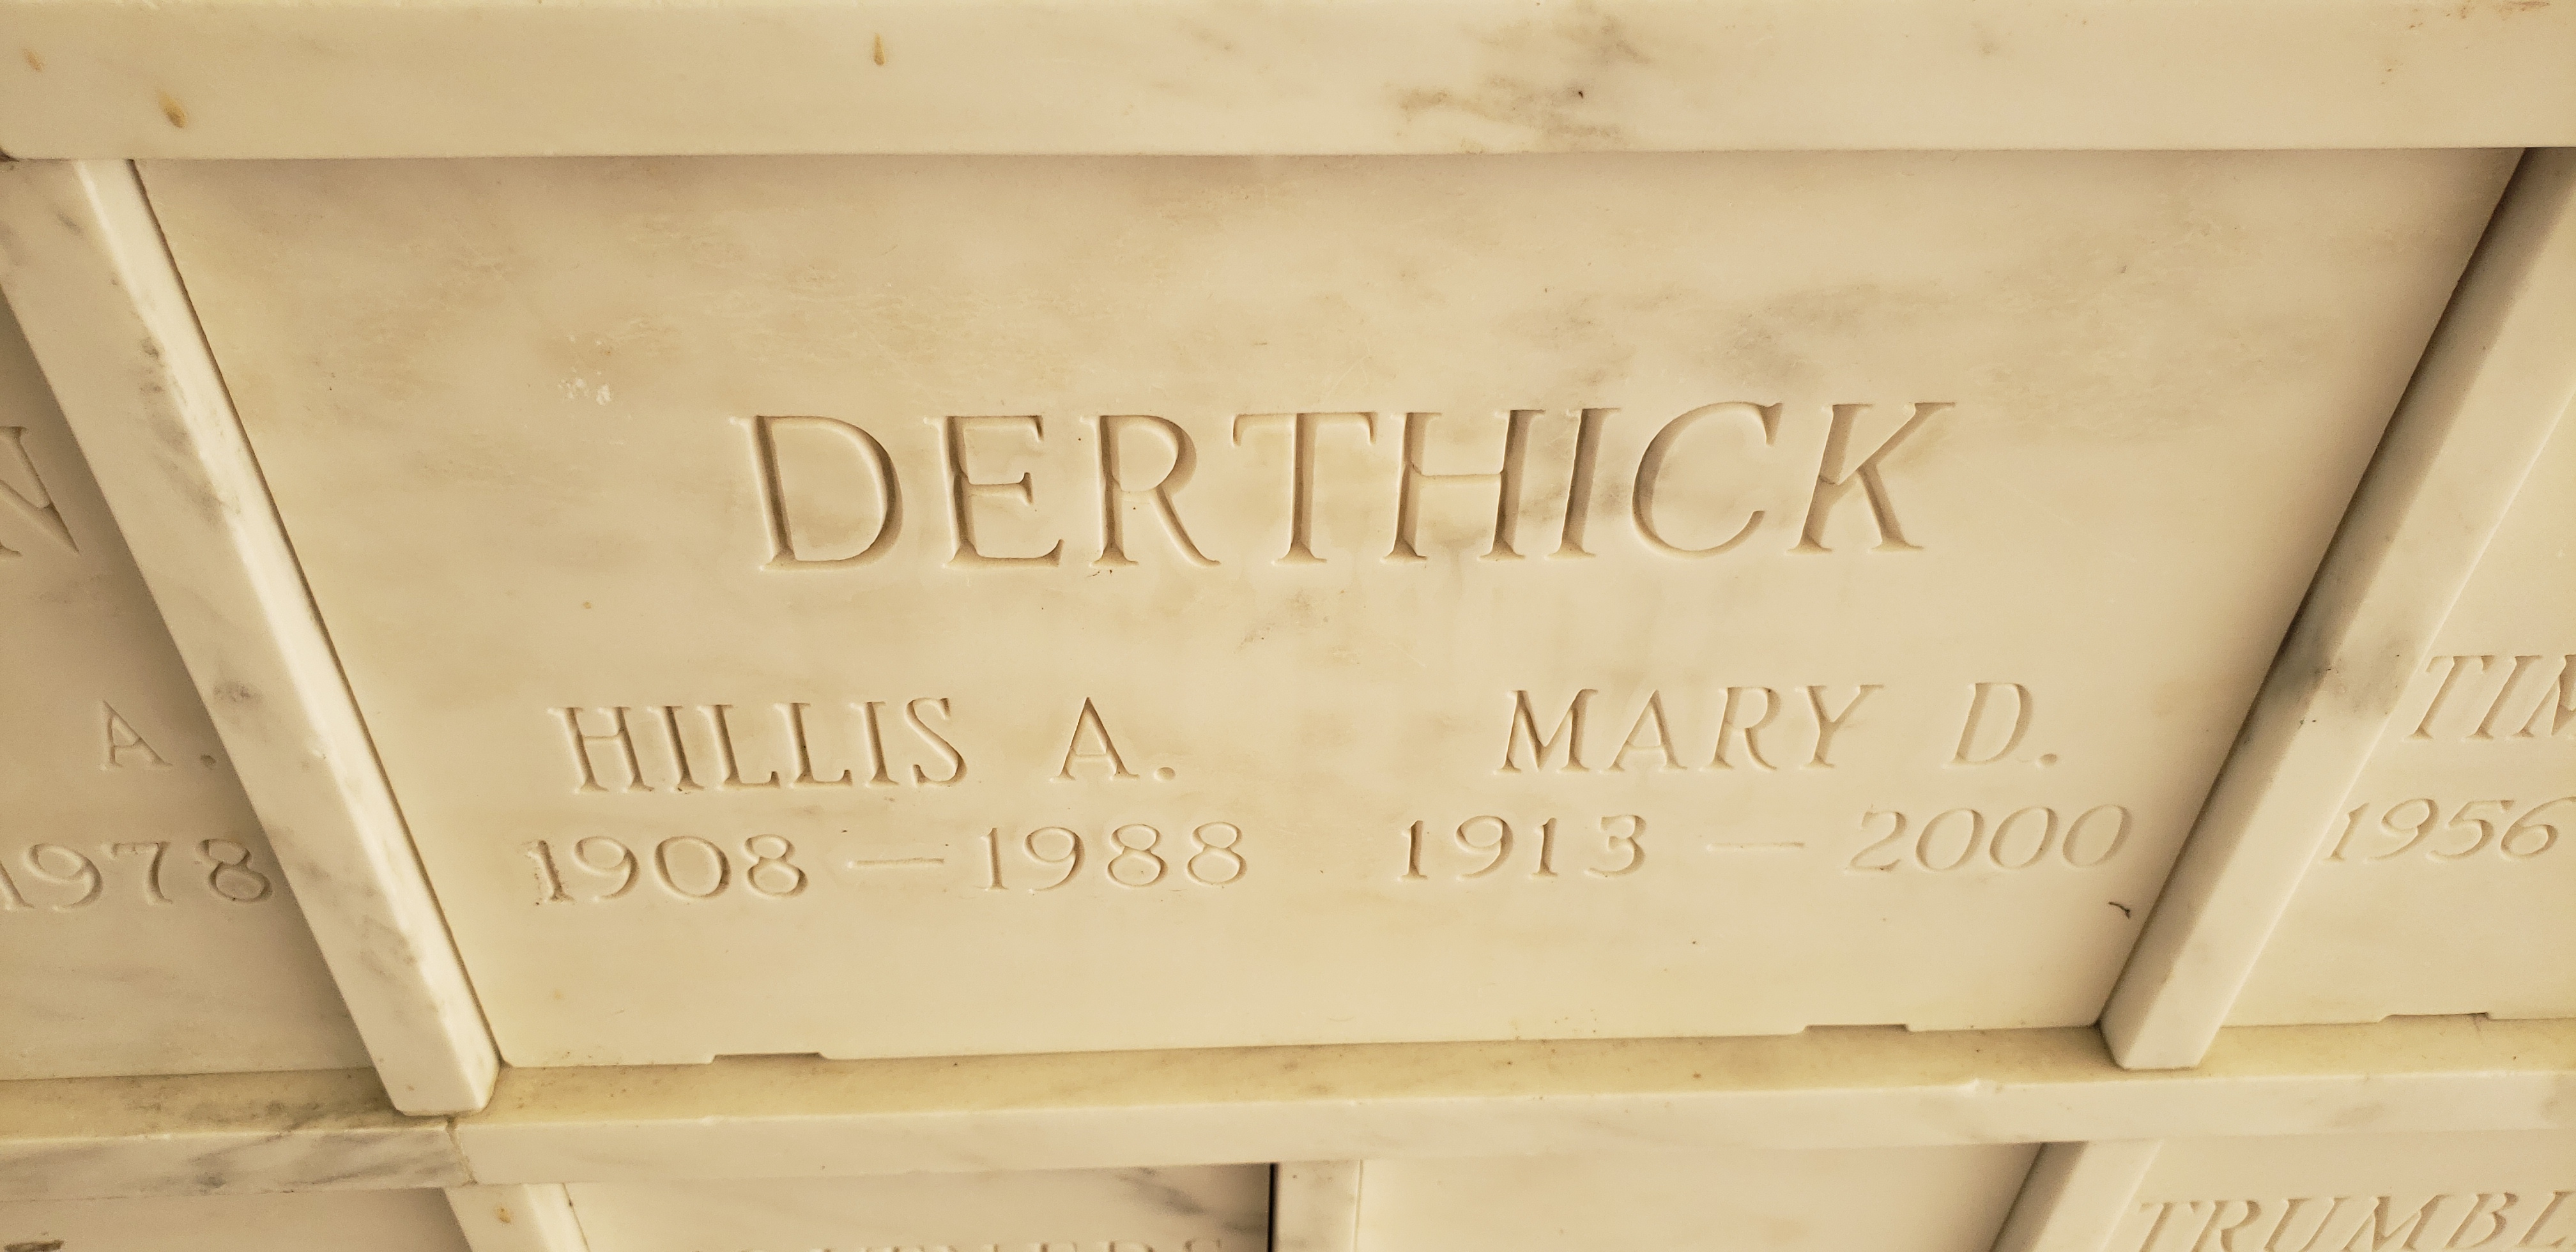 Mary D Derthick